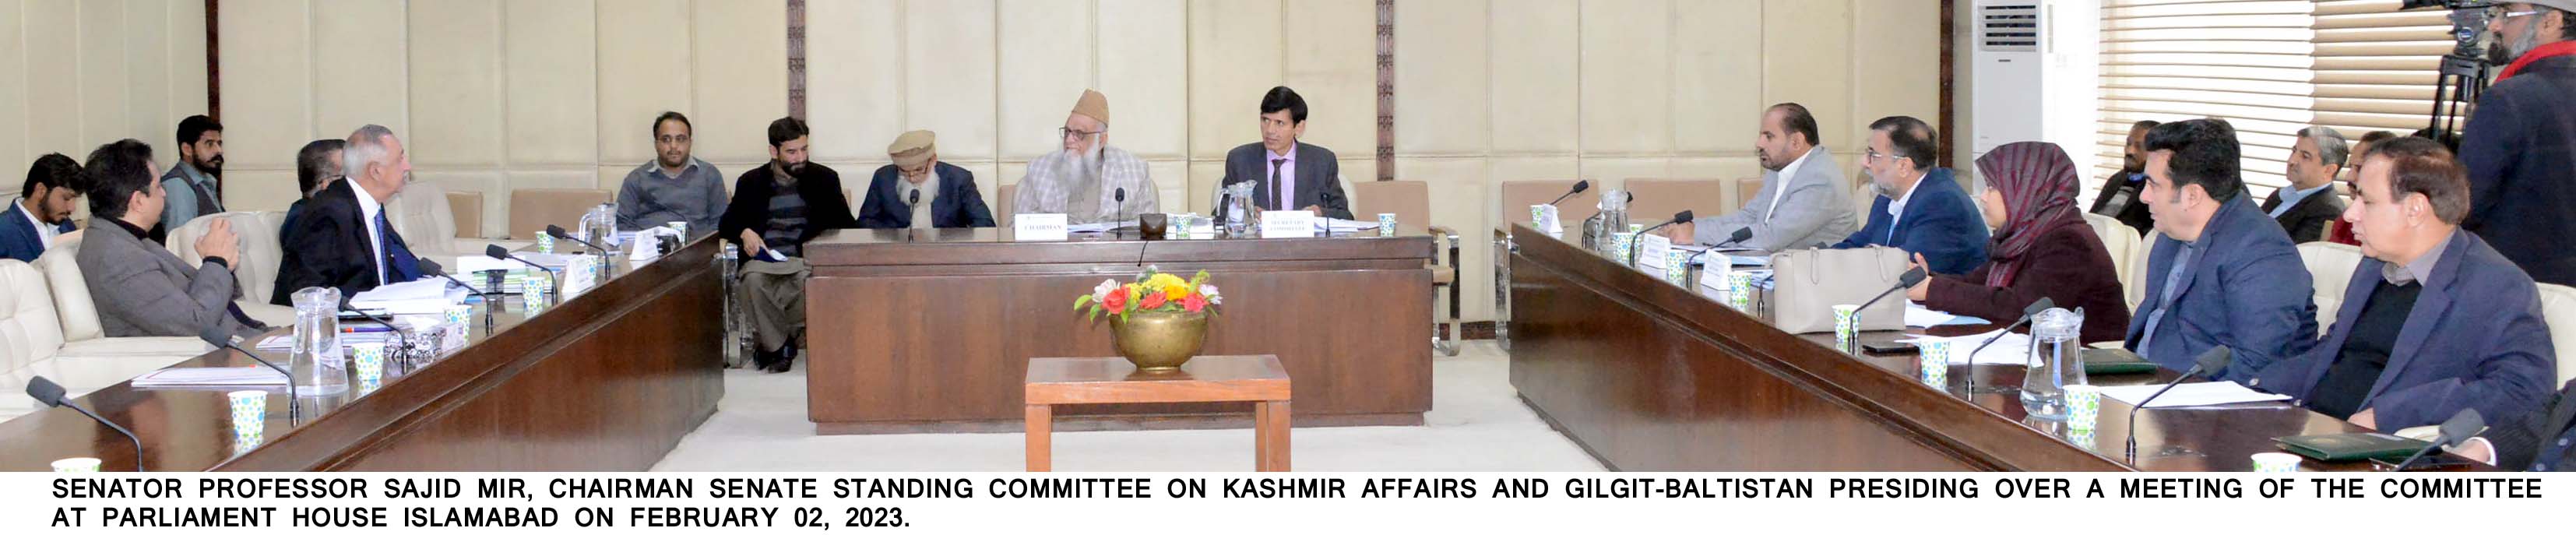 Meeting of the Senate Standing Committee on Kashmir Affairs and Gilgit Baltistan held at Parliament House with Senator Prof. Sajid Mir in Chair.